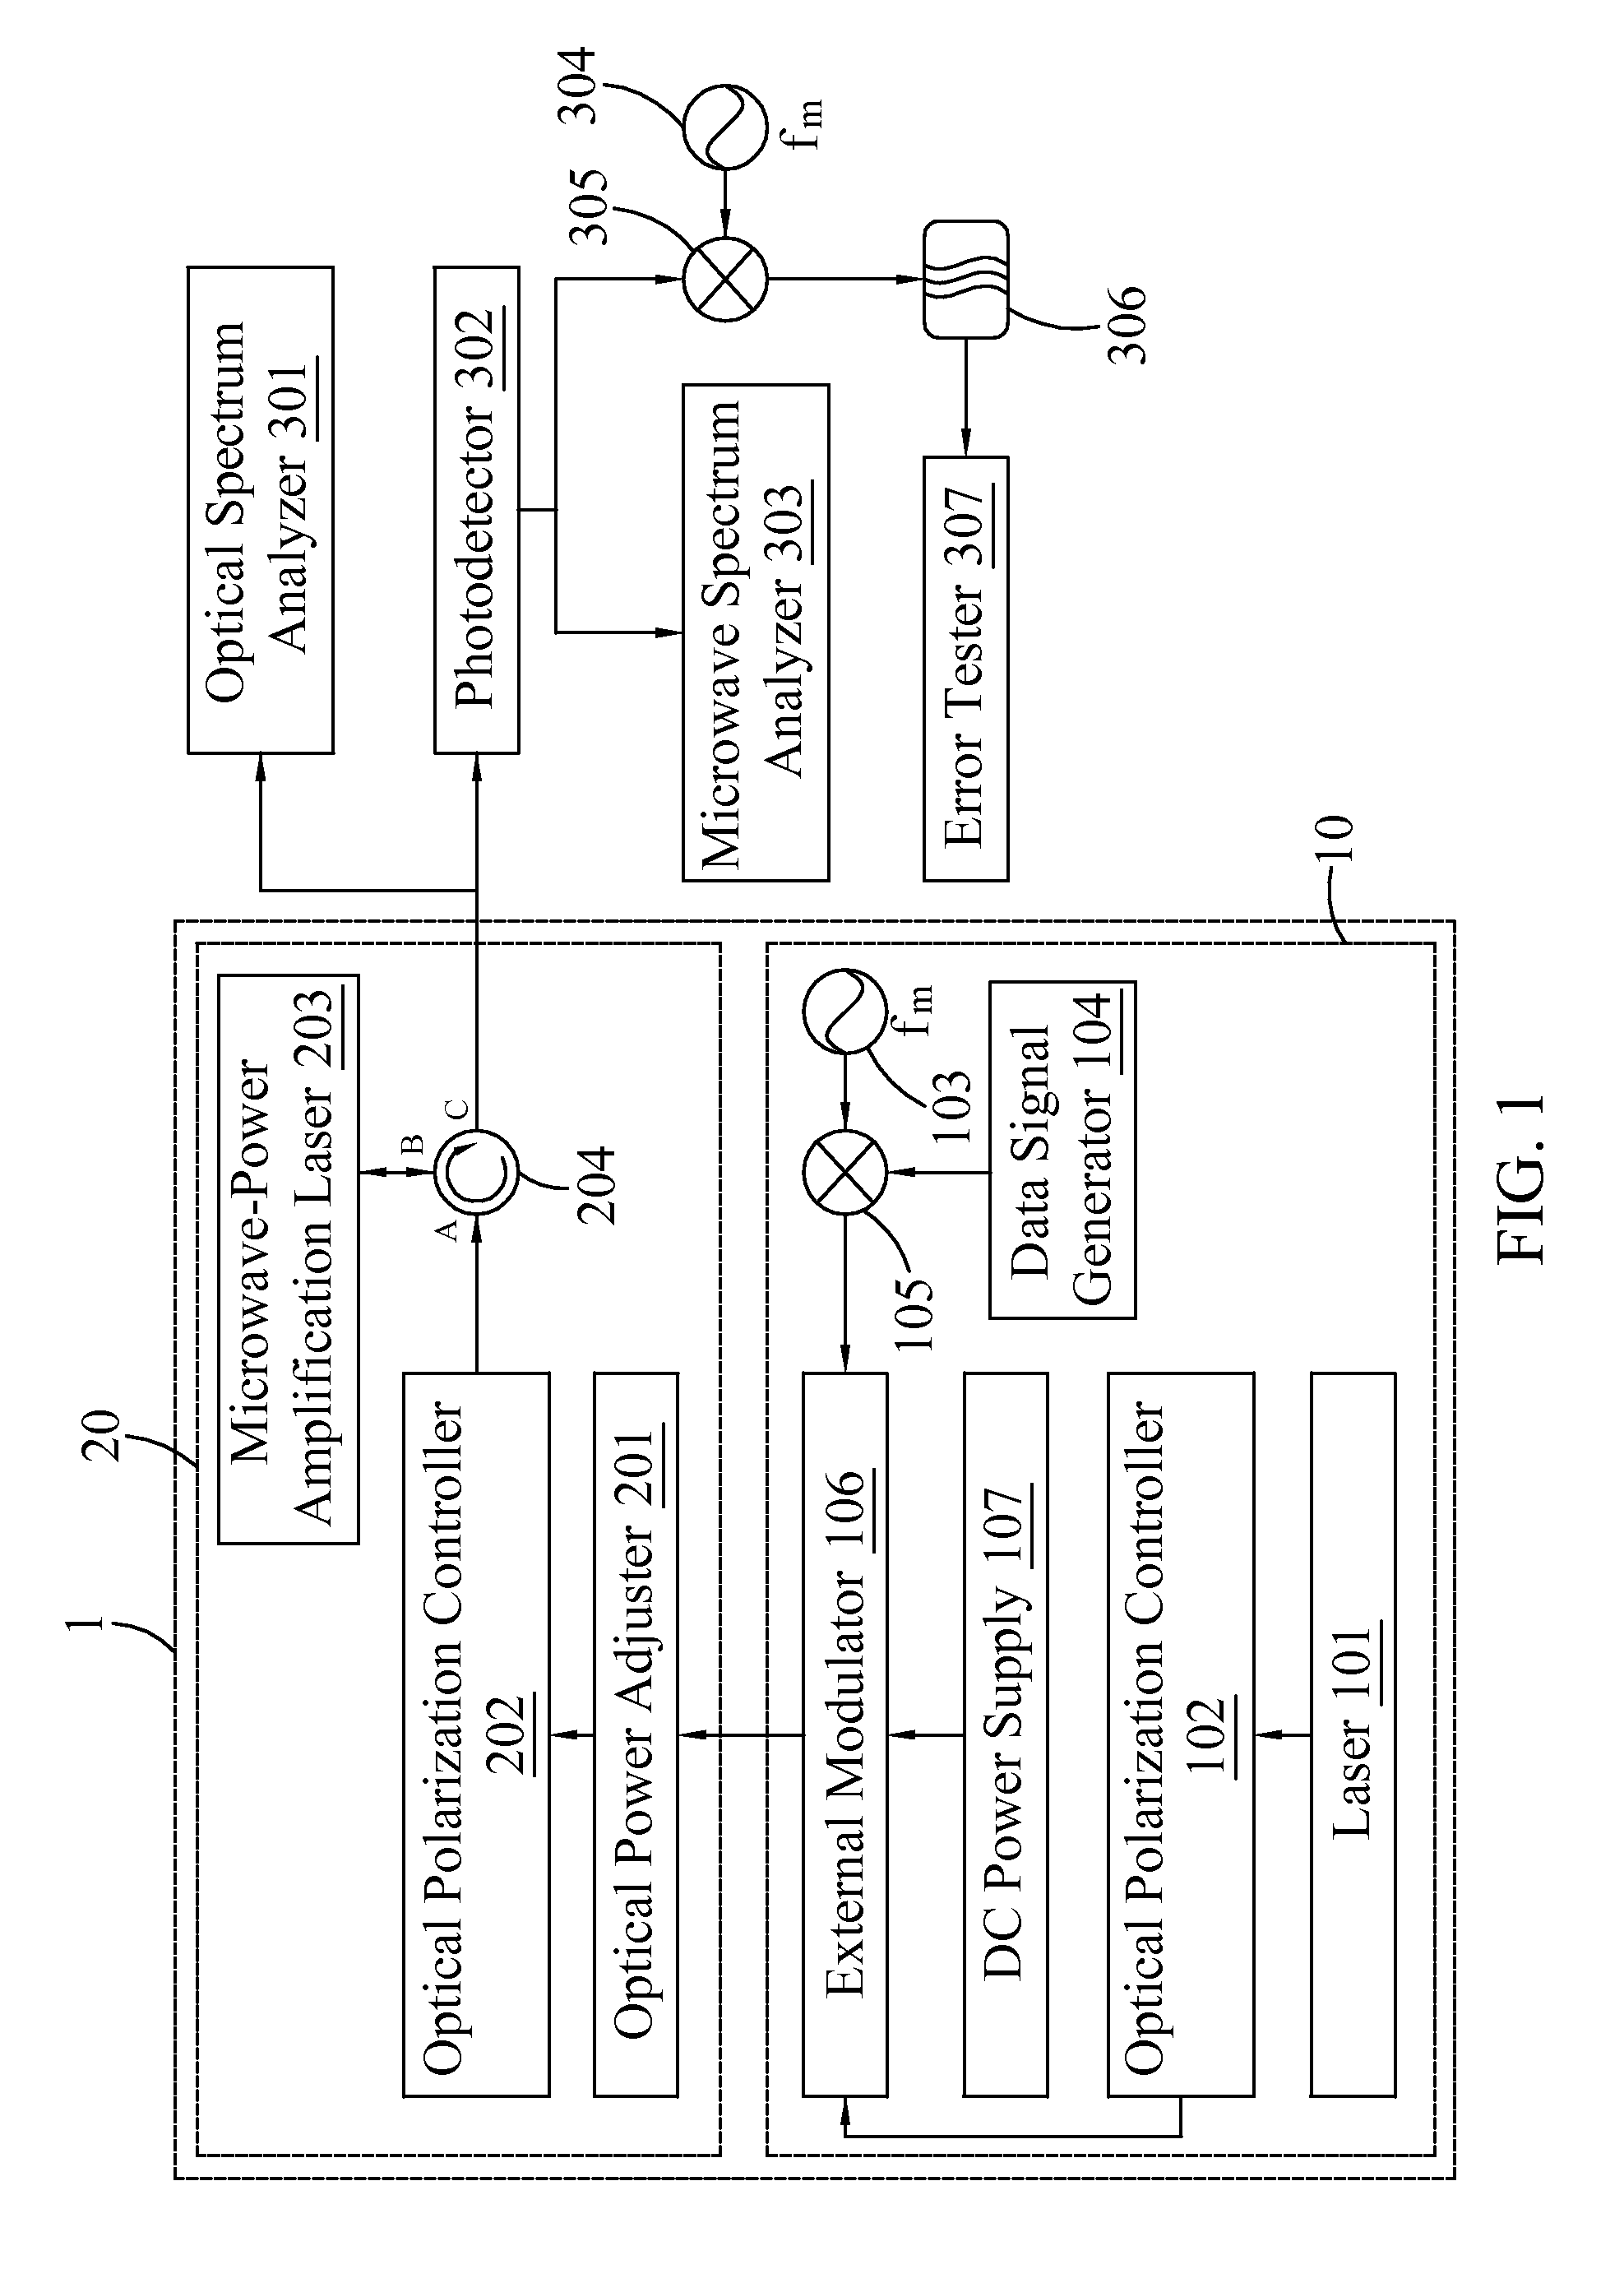 Microwave power amplification apparatus and method thereof